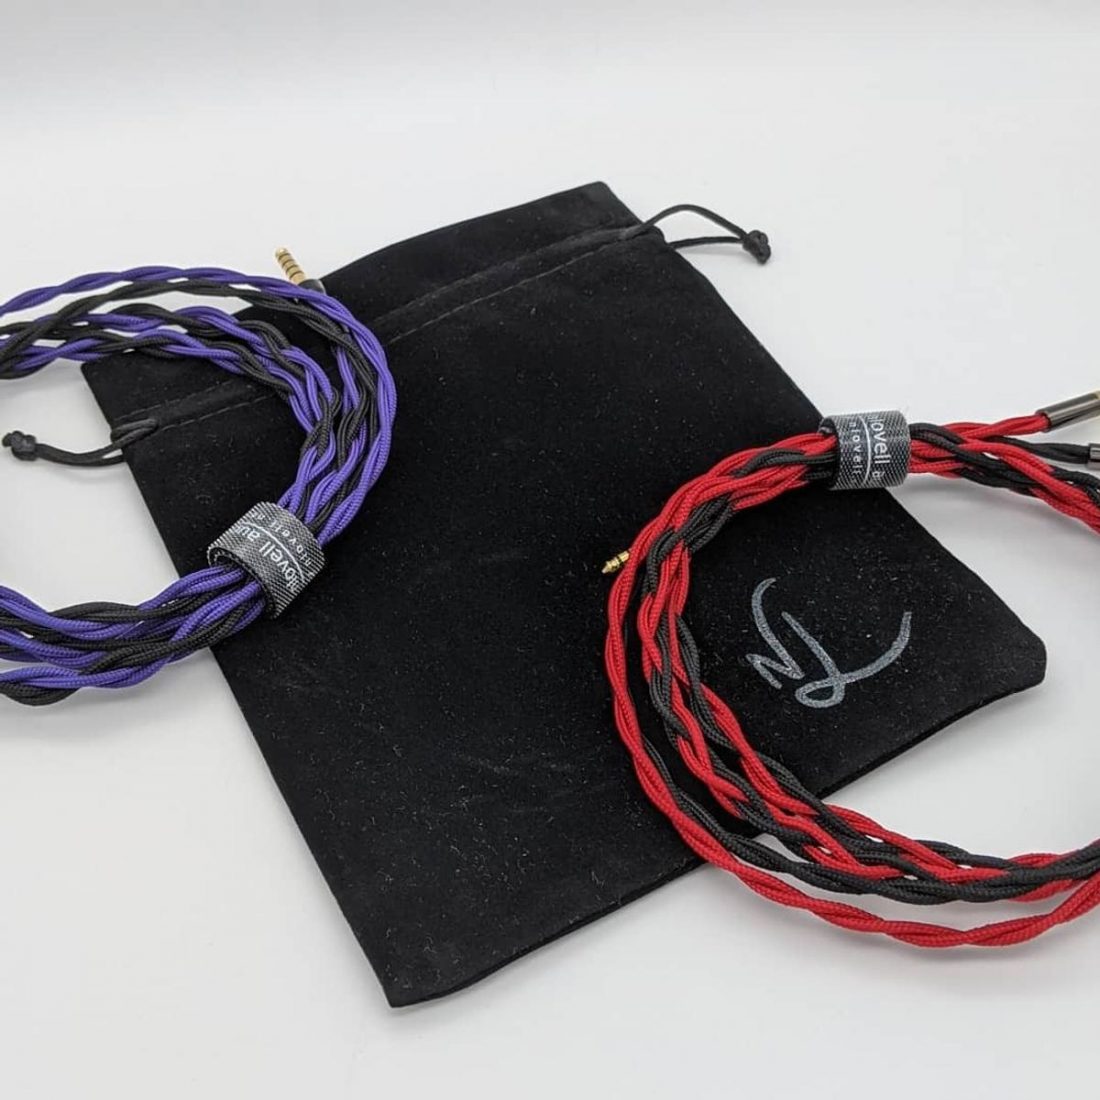 The included storage bag with each cable order from NLovell Audio.